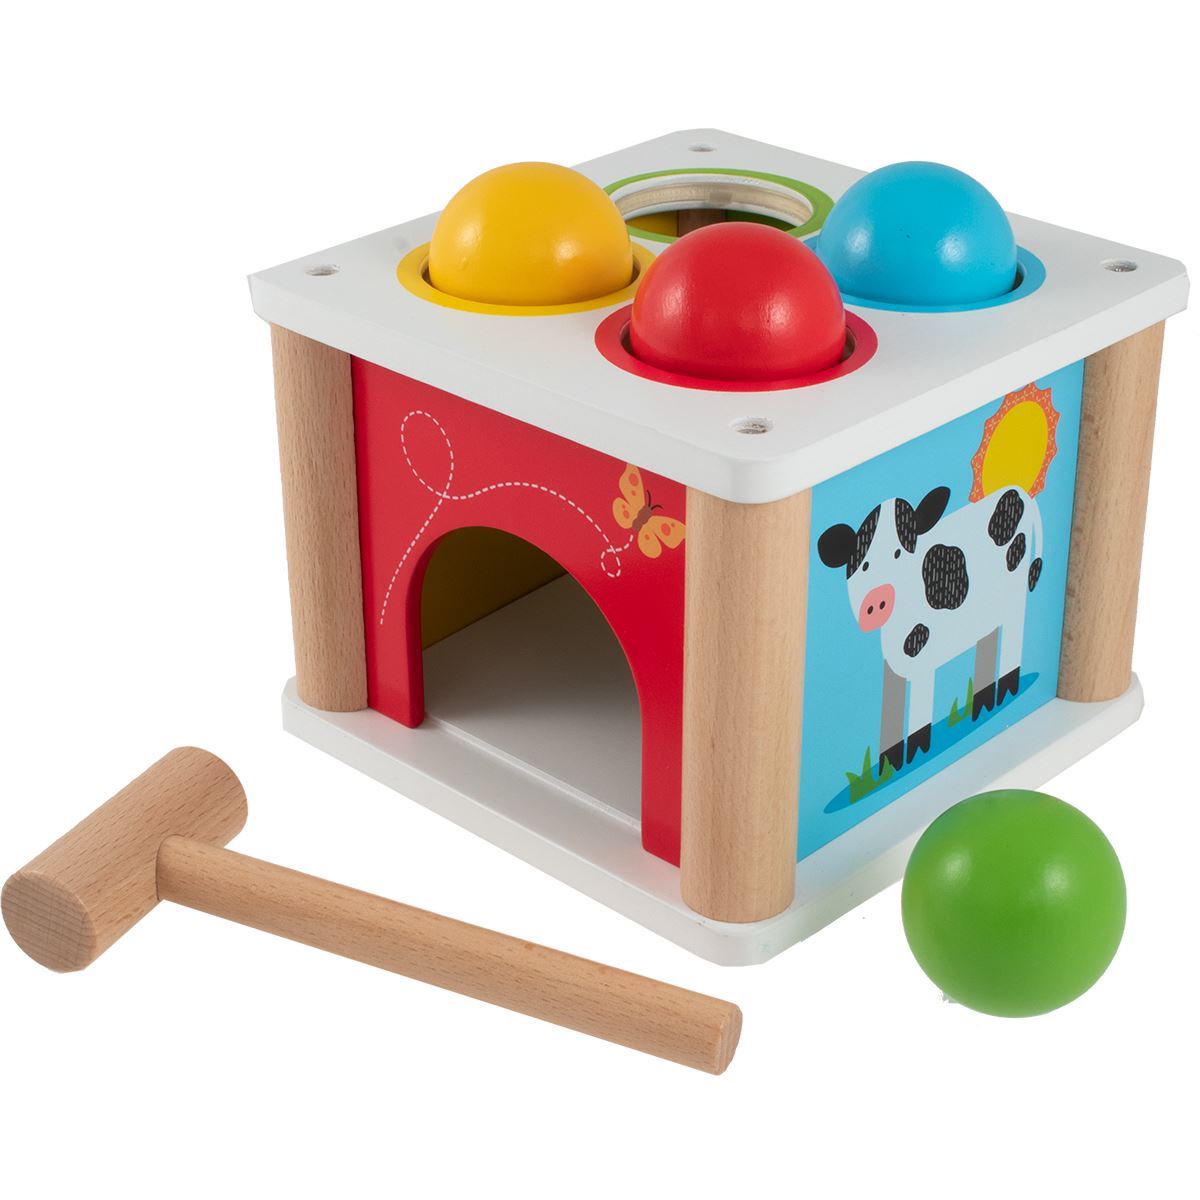 Wooden Tap Tap Ball